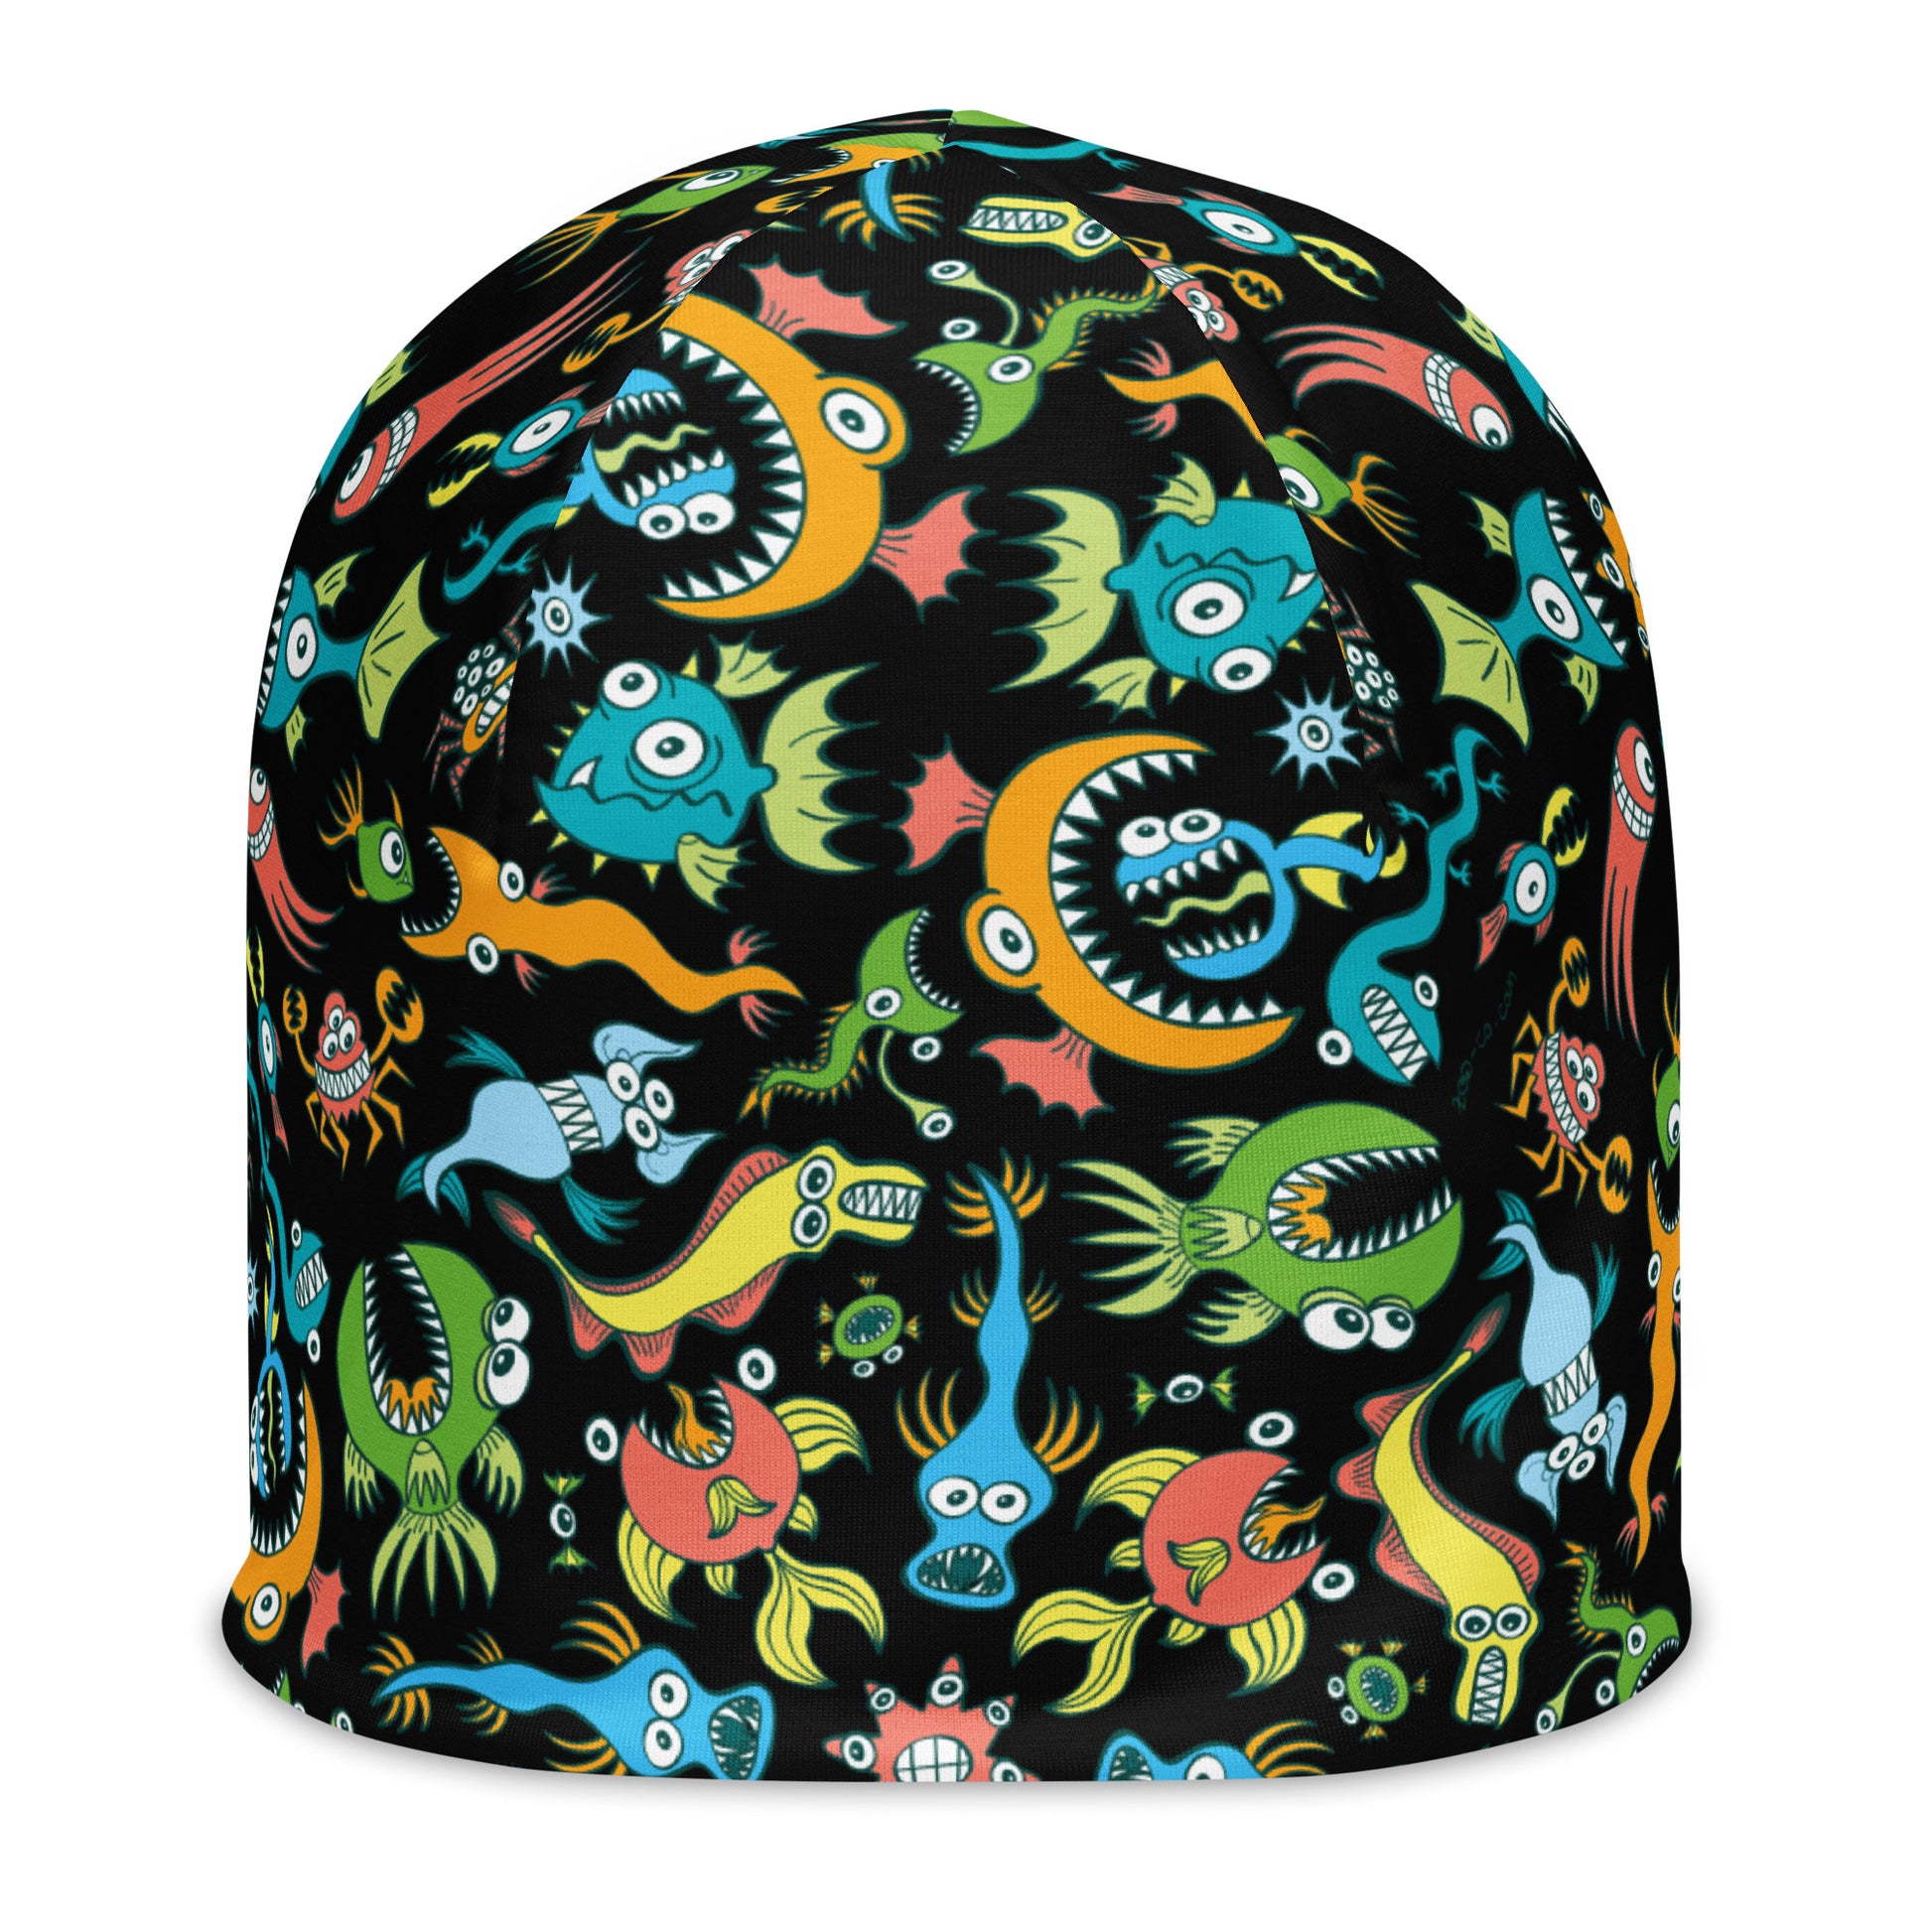 Sea creatures pattern design All-Over Print Beanie. Product details